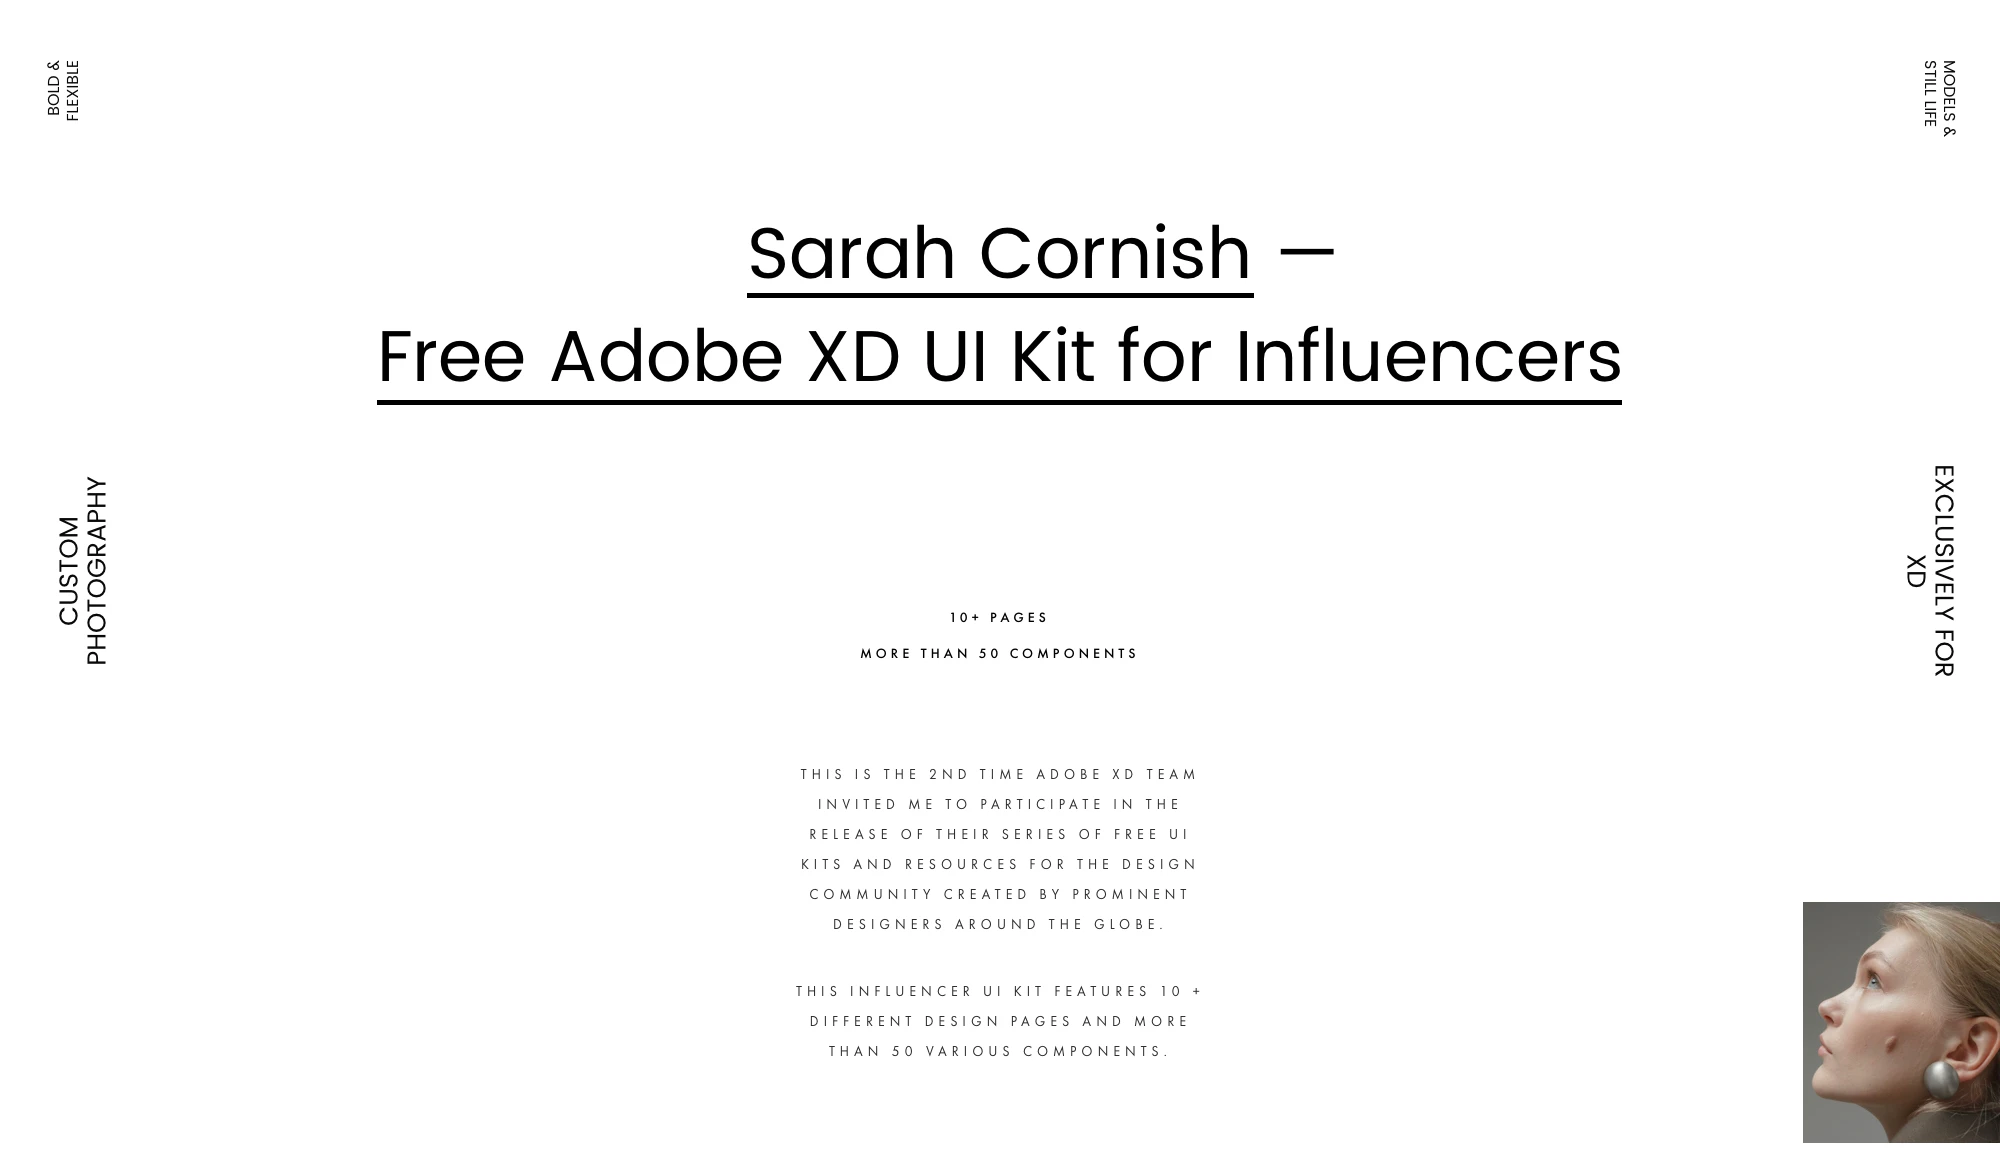 Fashion Influencer UI Kit for Adobe XD - The UI Kit itself is #MadeInAdobeXD and is available for free. It features a ton of goodies for you to use in your next design projects! Don't miss out!